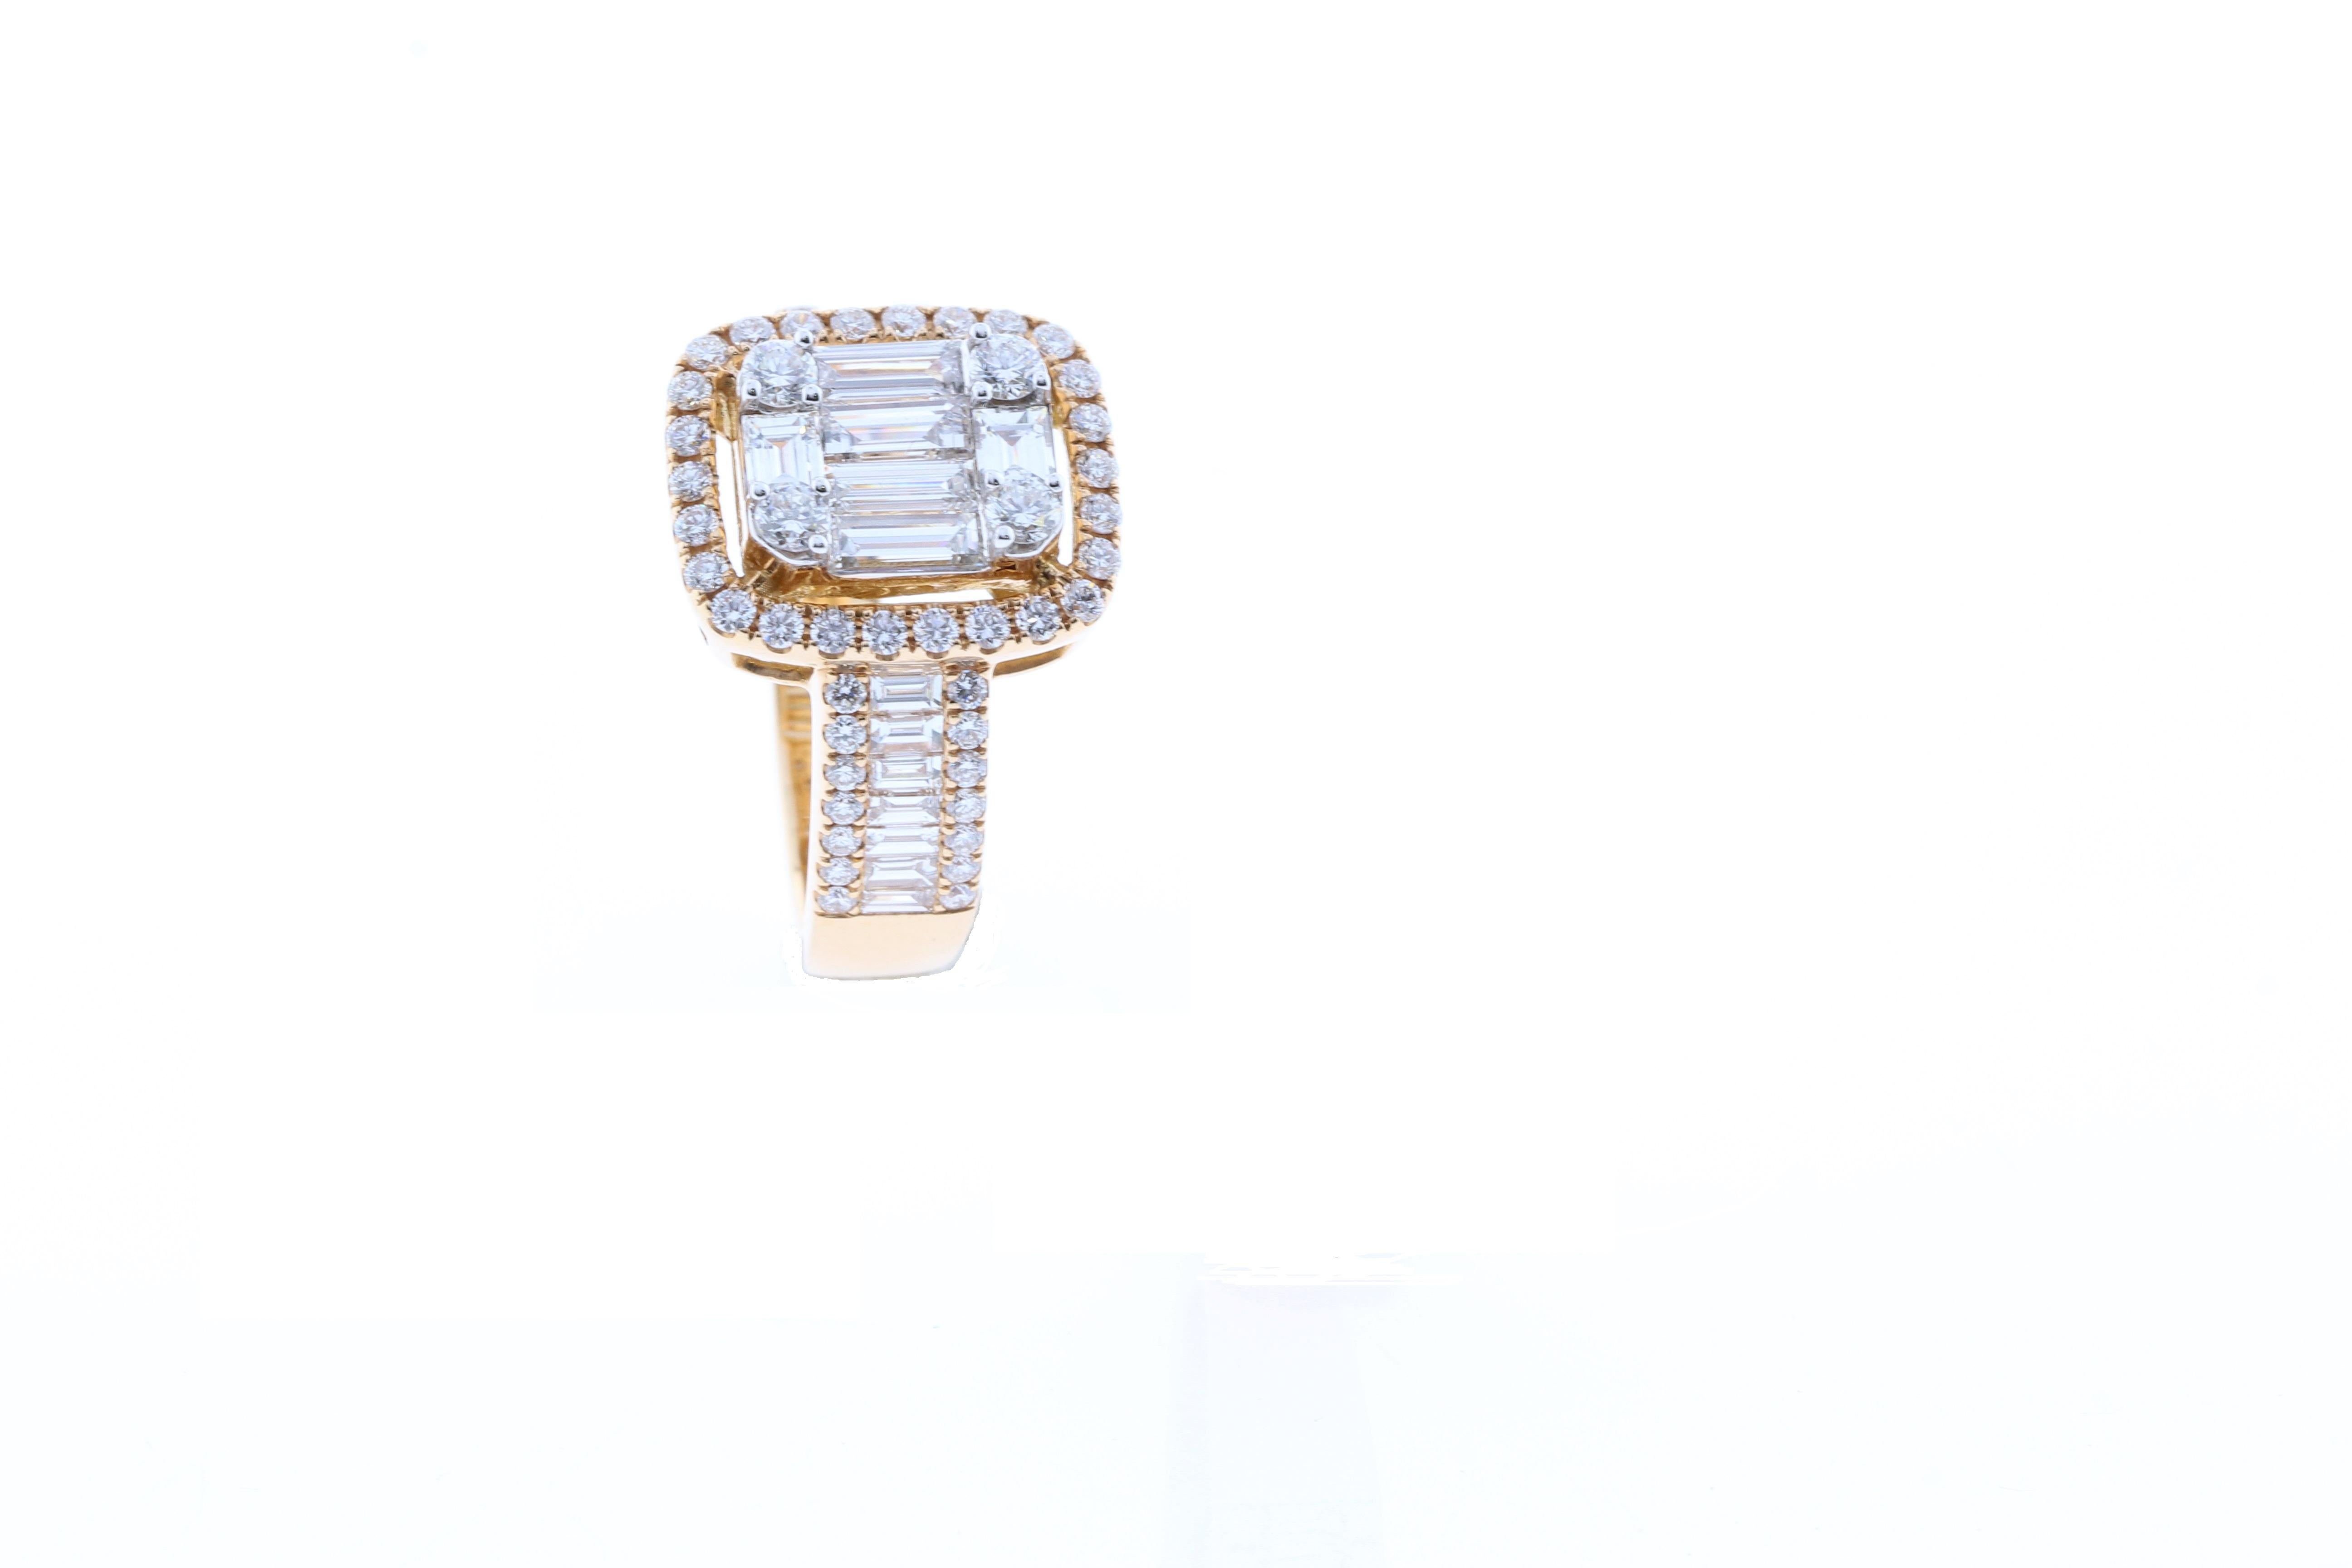 A stunning illusion ring with diamond tapper and round shape weighing 1.80 carats. A real eye-catcher, this ring will surely make an impact. This ring has a total weight of  6.25 grams in 18K rose gold.

Allure Jewellery Mfg. Co., Ltd. stands out